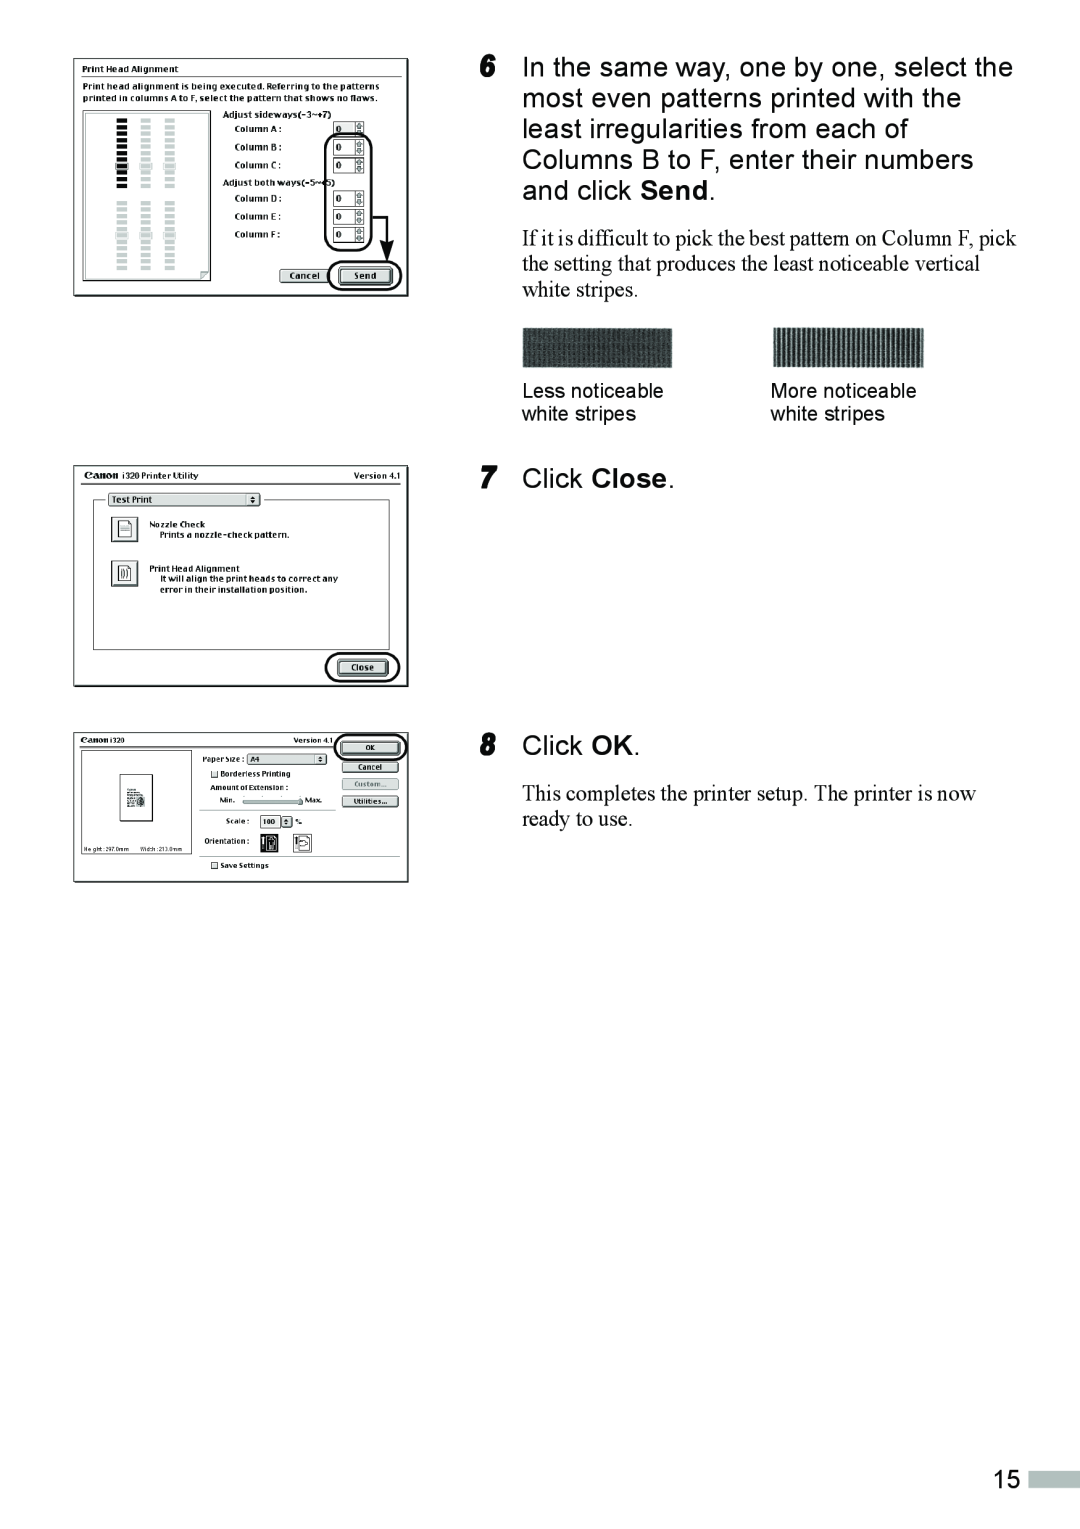 Canon 320 quick start Click Close 8 Click OK, This completes the printer setup. The printer is now ready to use 